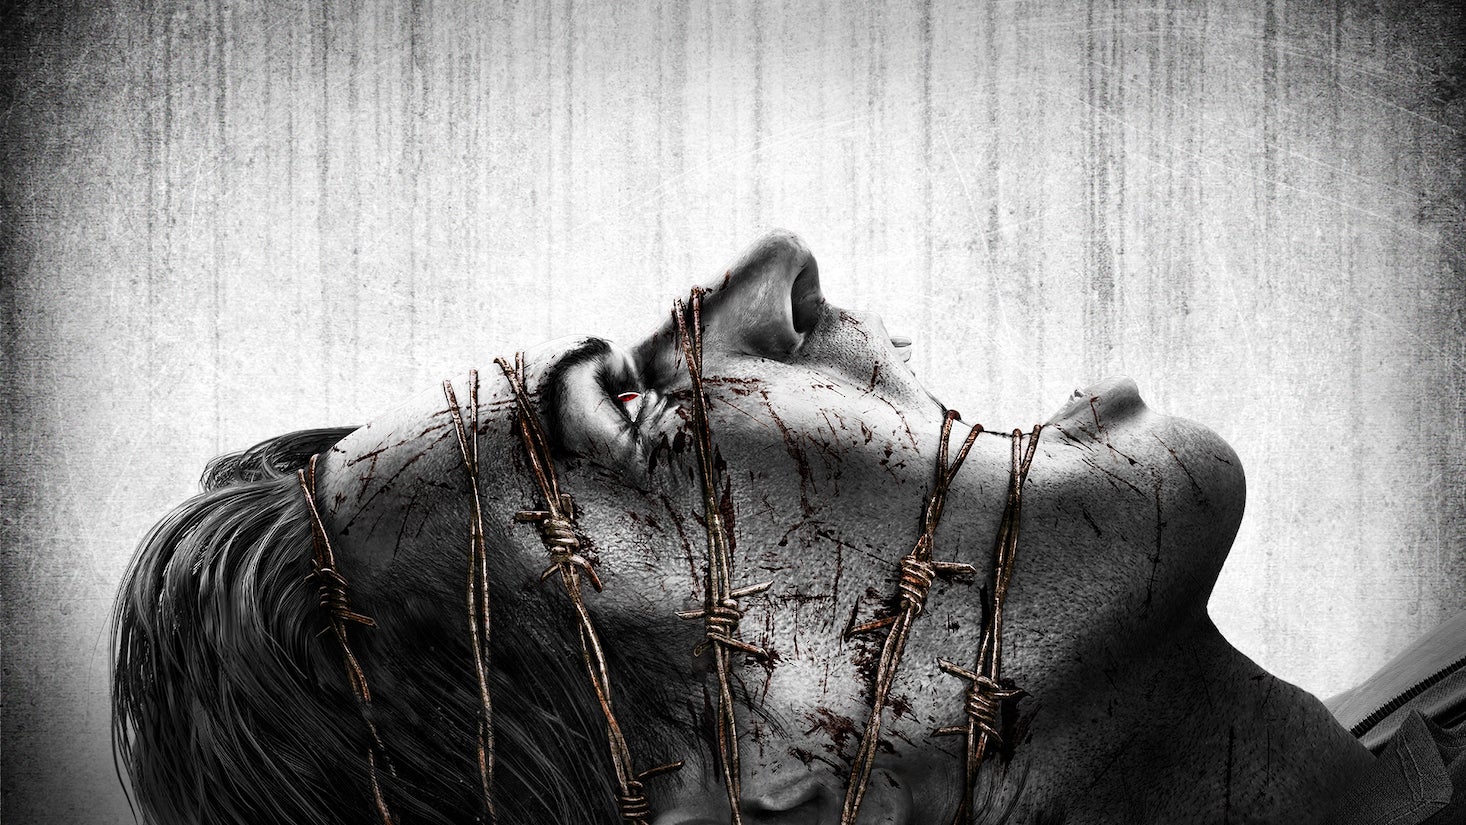 Sebastion's face is wrapped in barbed wire as he looks up in The Evil Within's concept art.